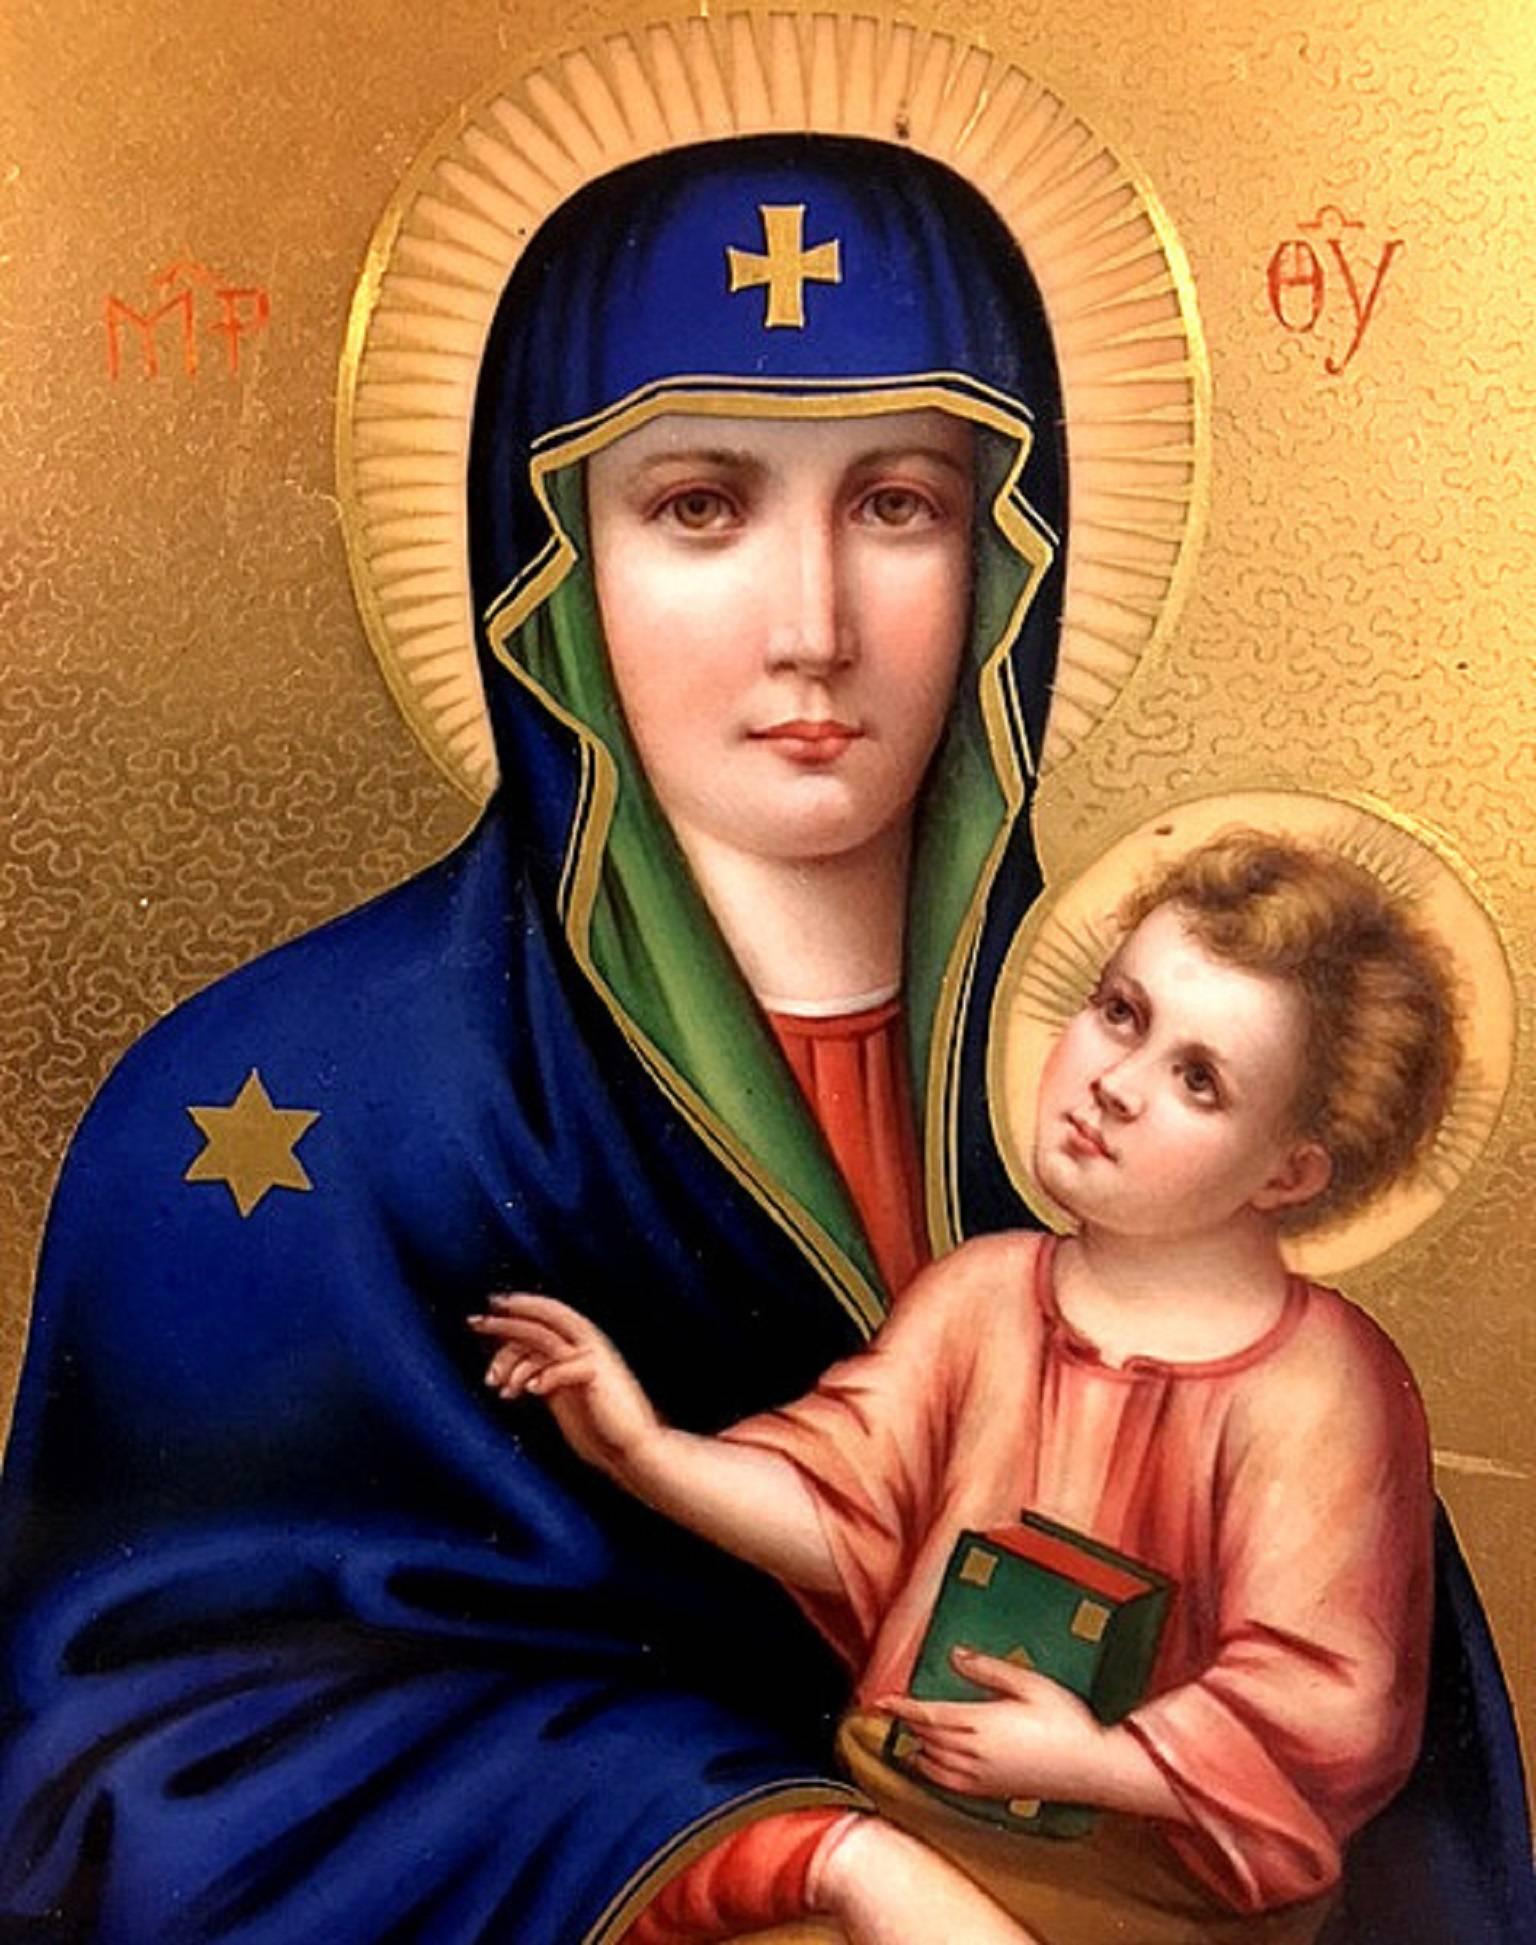 KPM Porcelain plaque depicting Mary with child on a golden ground. Marked KPM on the reverse. Beautiful quality and good original condition. Mother and child here represented in the tradition of orthodox icons.
Above her head are the letters “MP